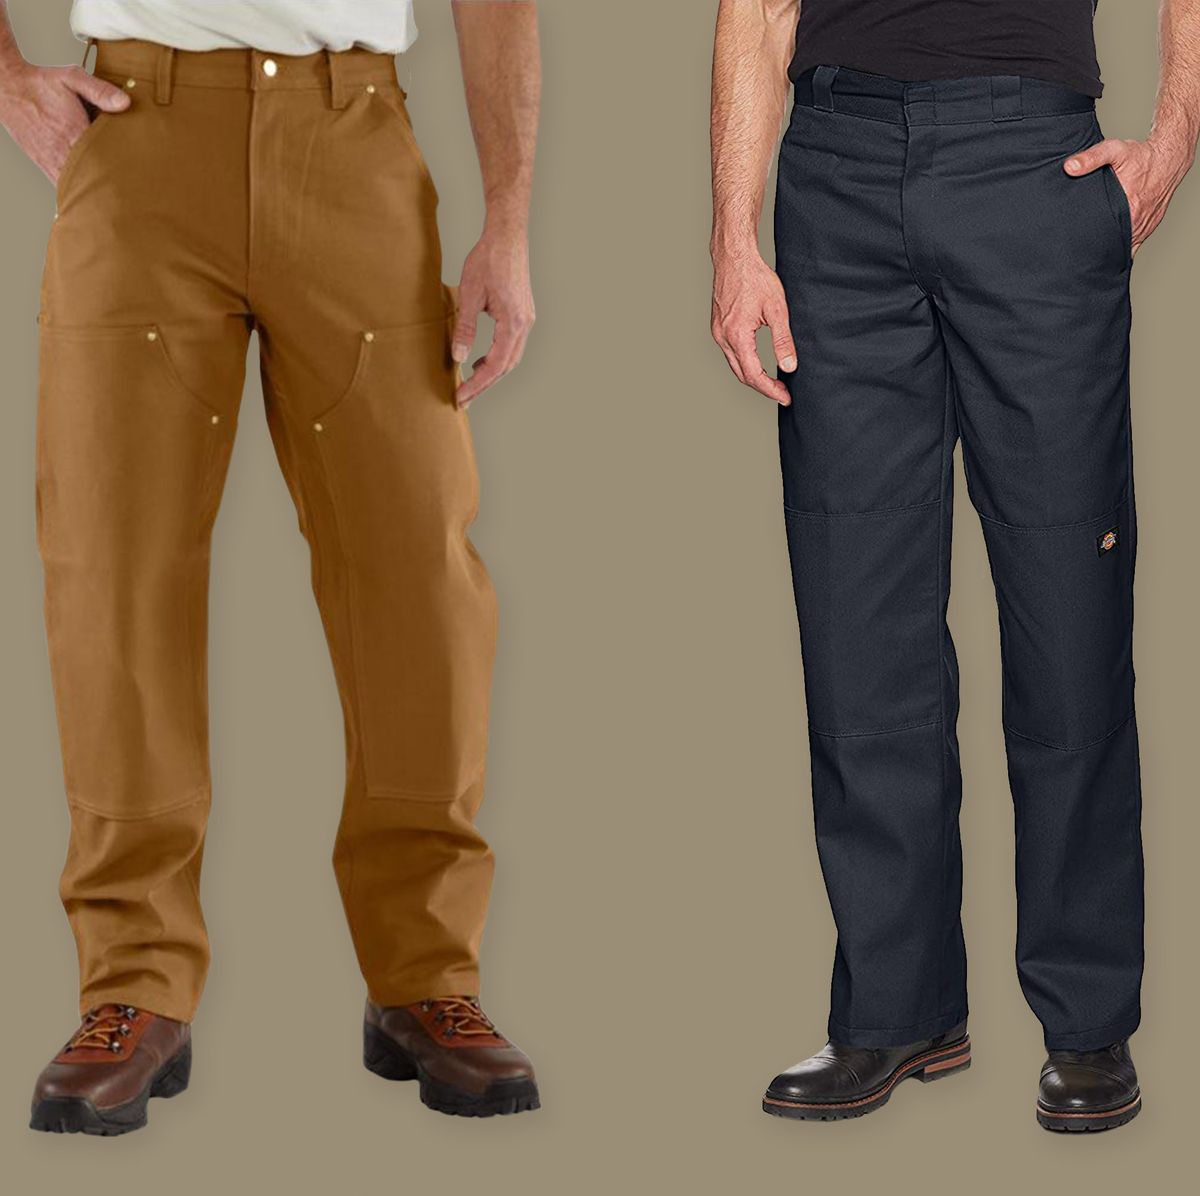 A Look at Carhartt's Bestselling Jeans